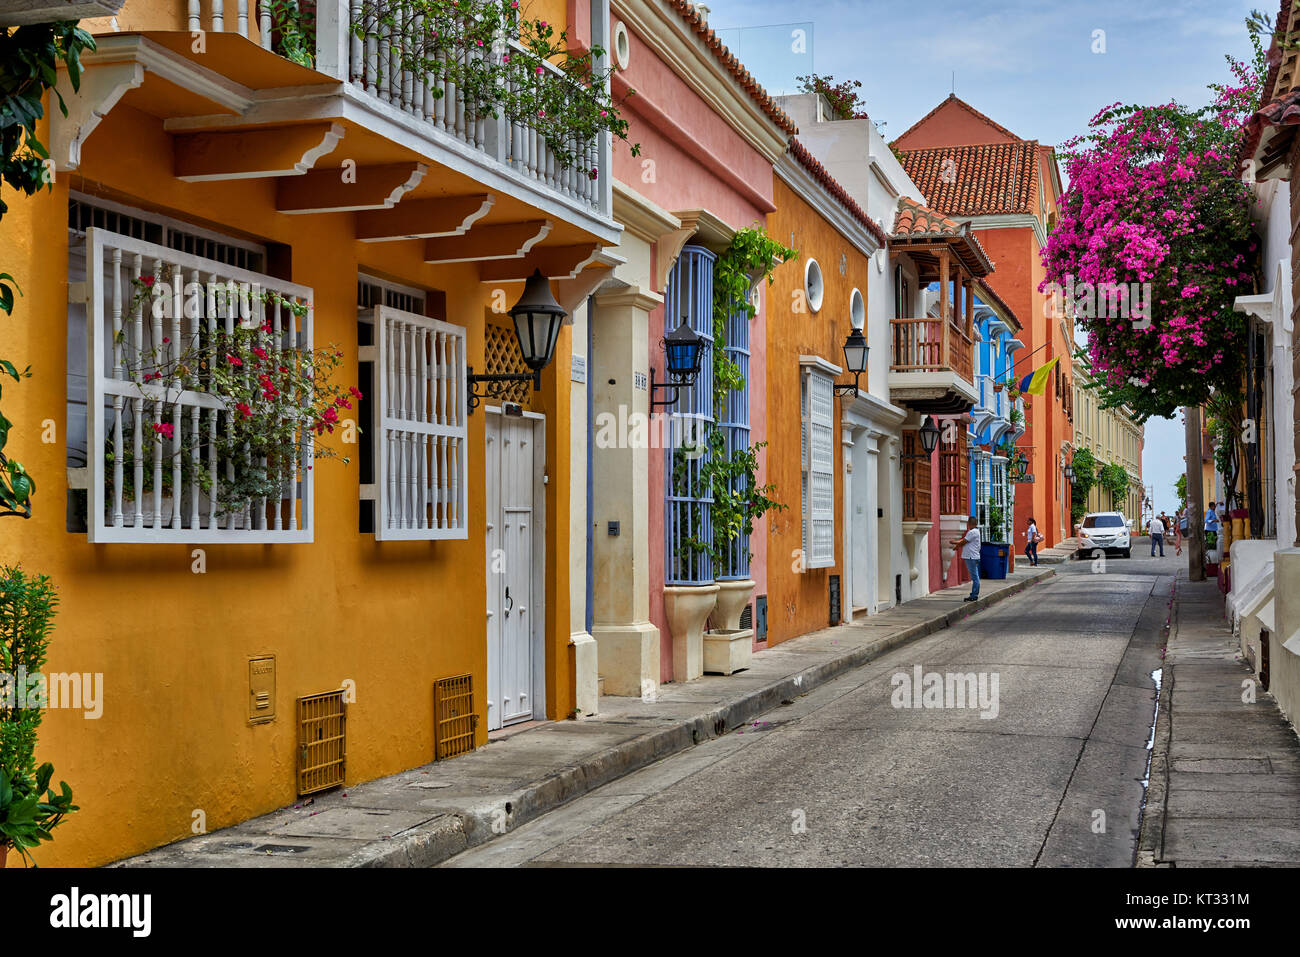 typical colorful facades with balconies and flowers of houses in Cartagena de Indias, Colombia, South America Stock Photo